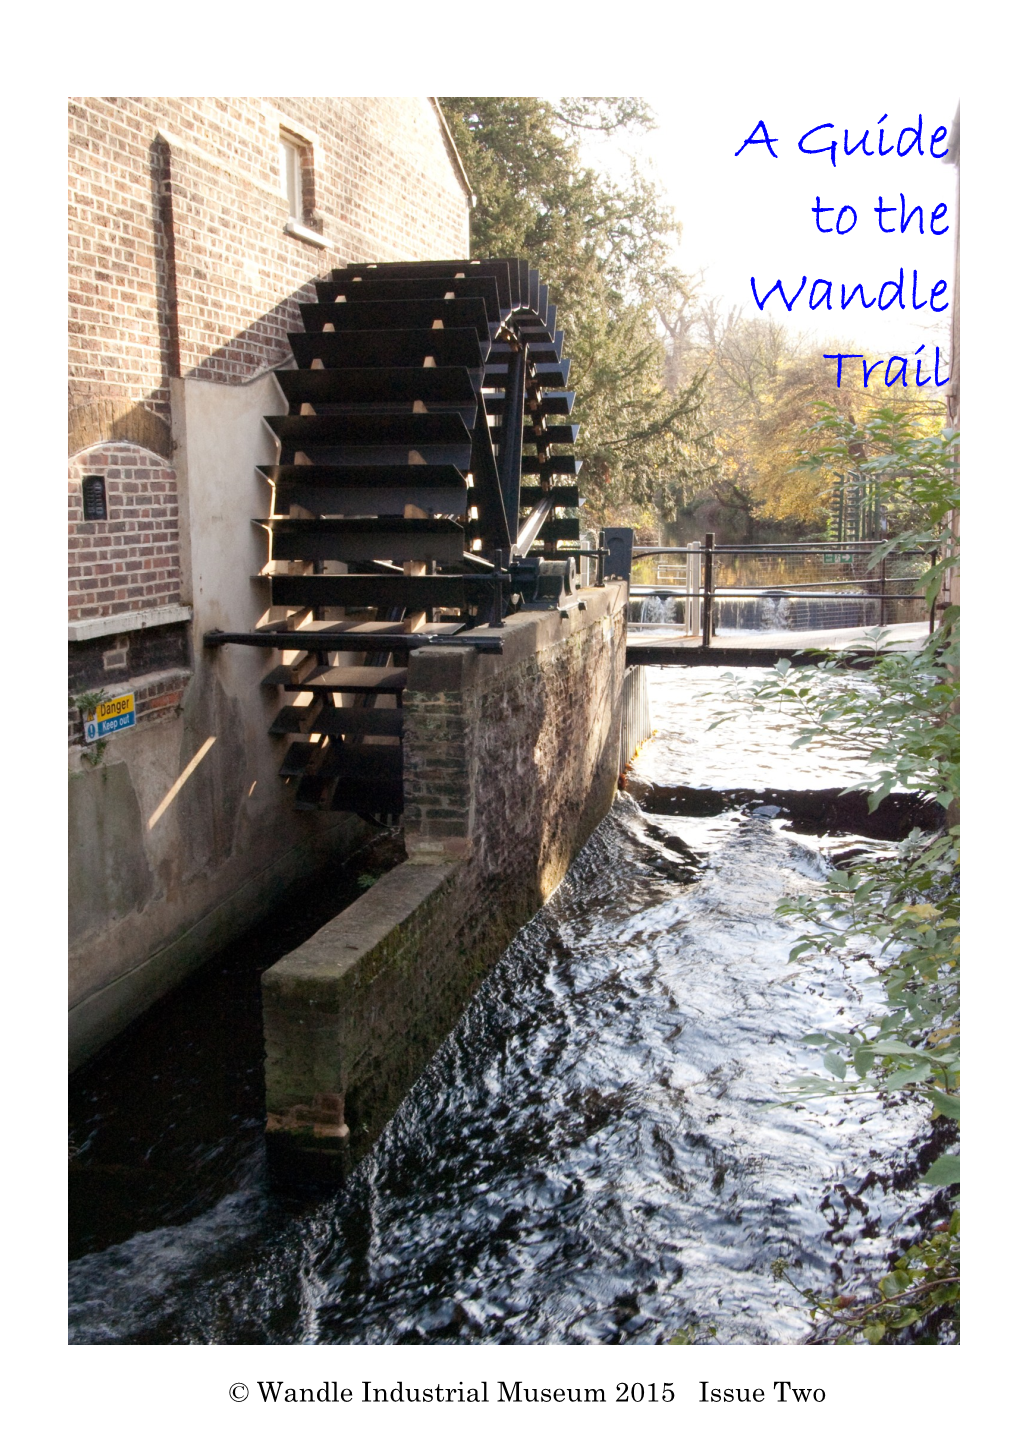 A Guide to the Wandle Trail